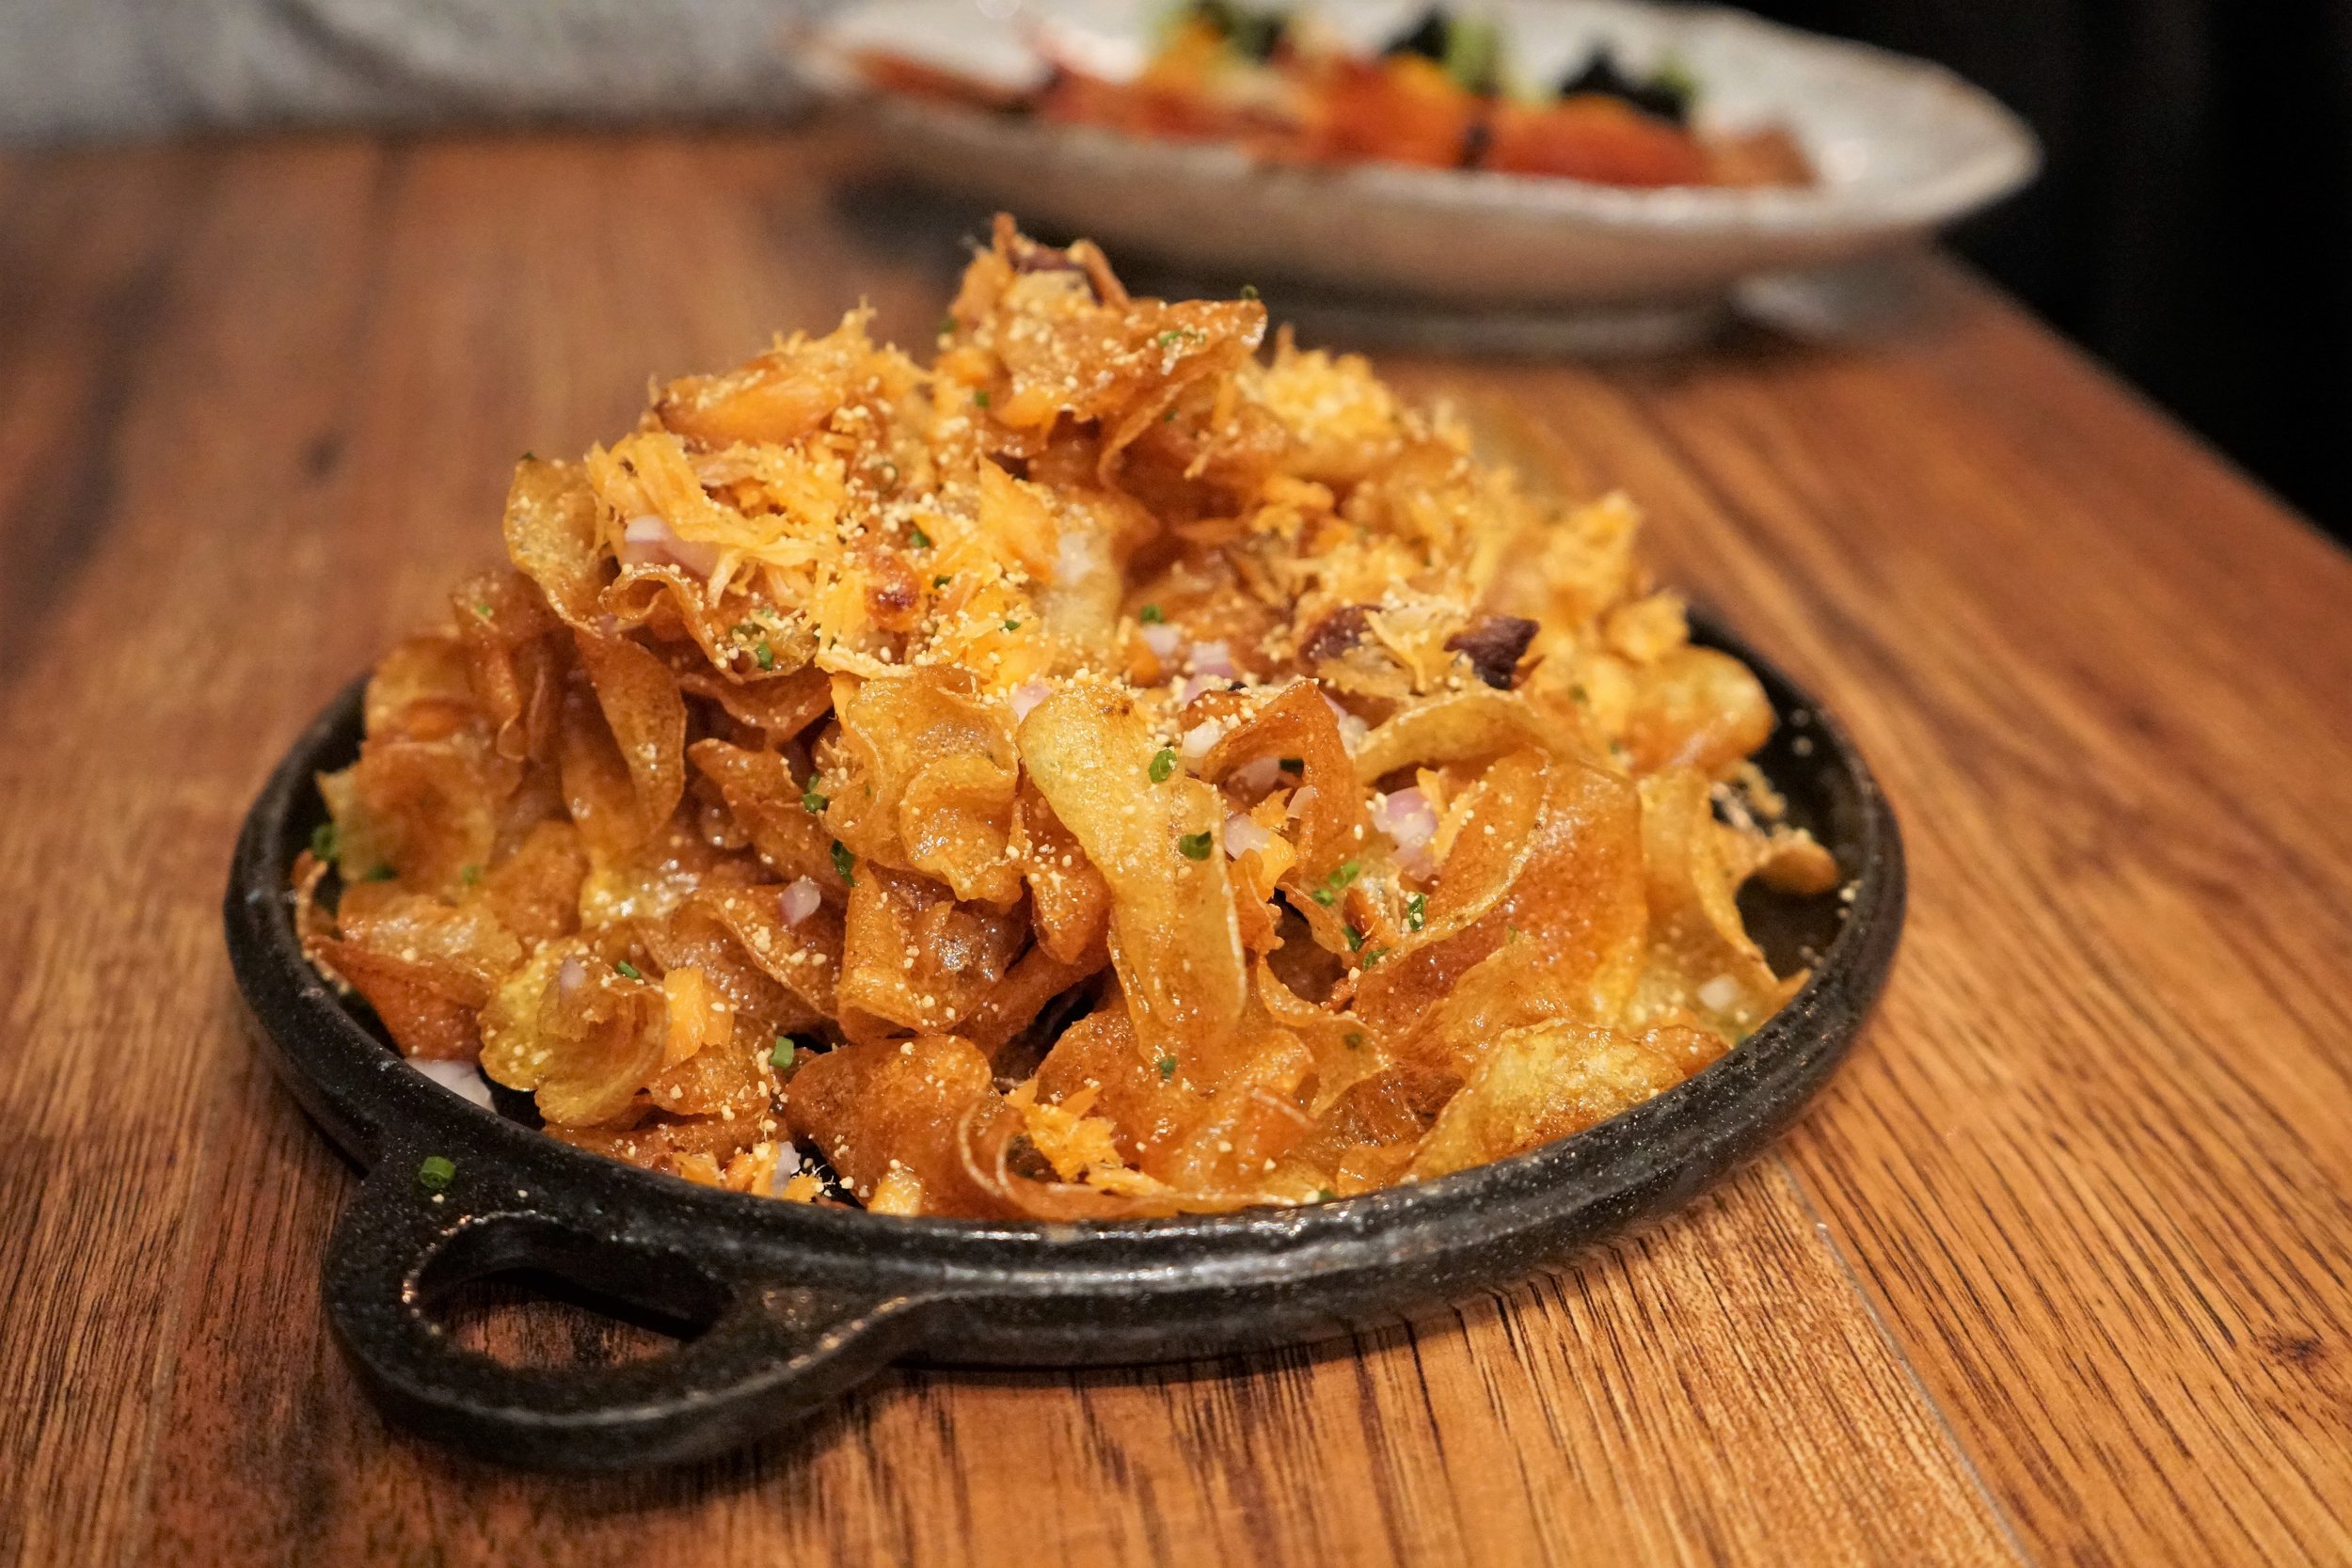 Honey Butter Chips with Scottish Salmon Jerky, Honey Butter Gastrique at Osamil in New York City